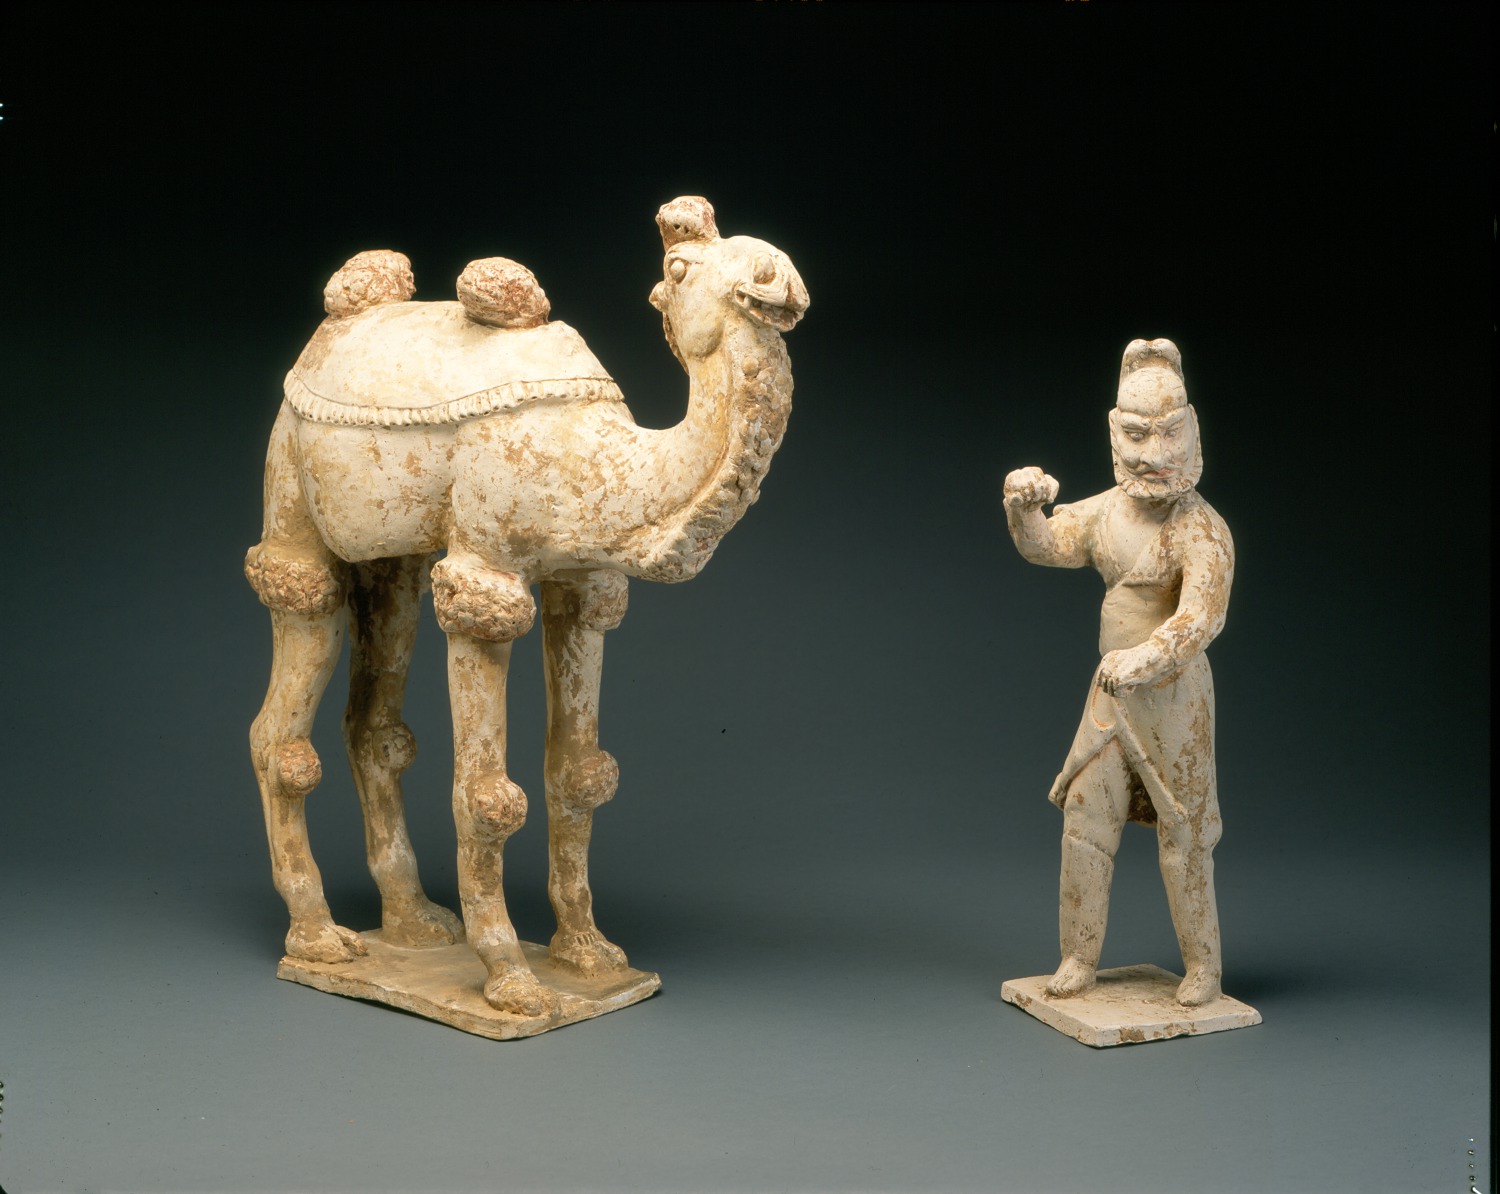 Unknown, Bactrian camel (Camello bactriano), Tang dynasty. White pottery with pigment traces. Asian Arts Council purchase with funds provided by Susan and Eliot Black.